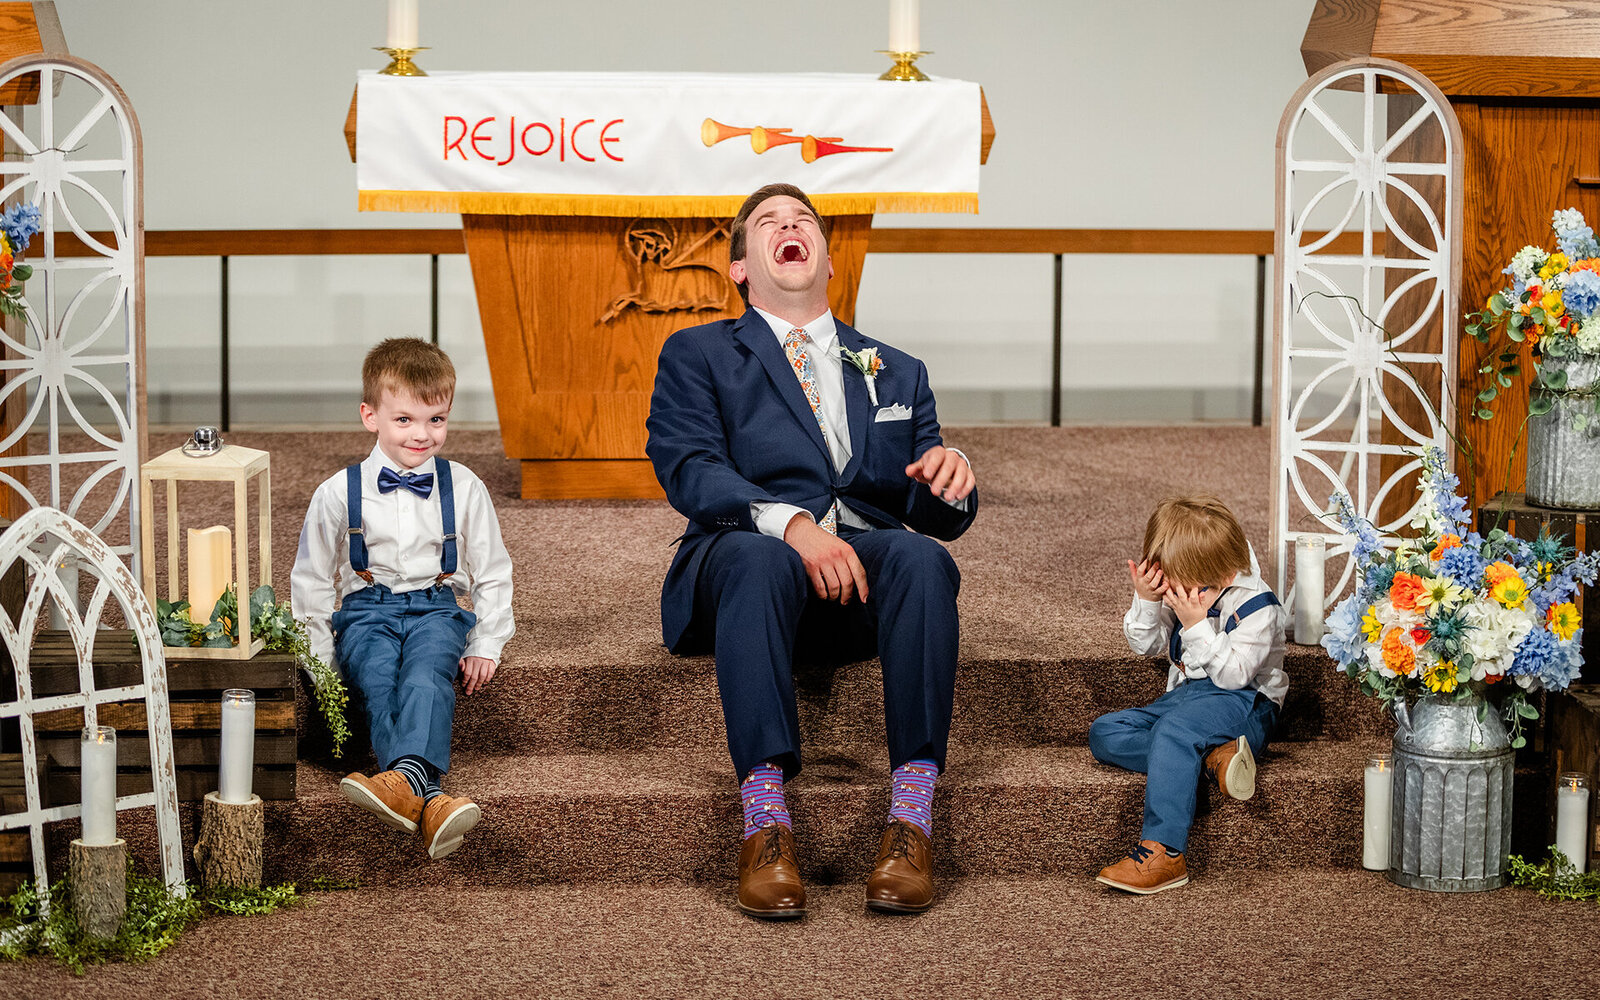 Capturing a moment of the groom with ring bearers